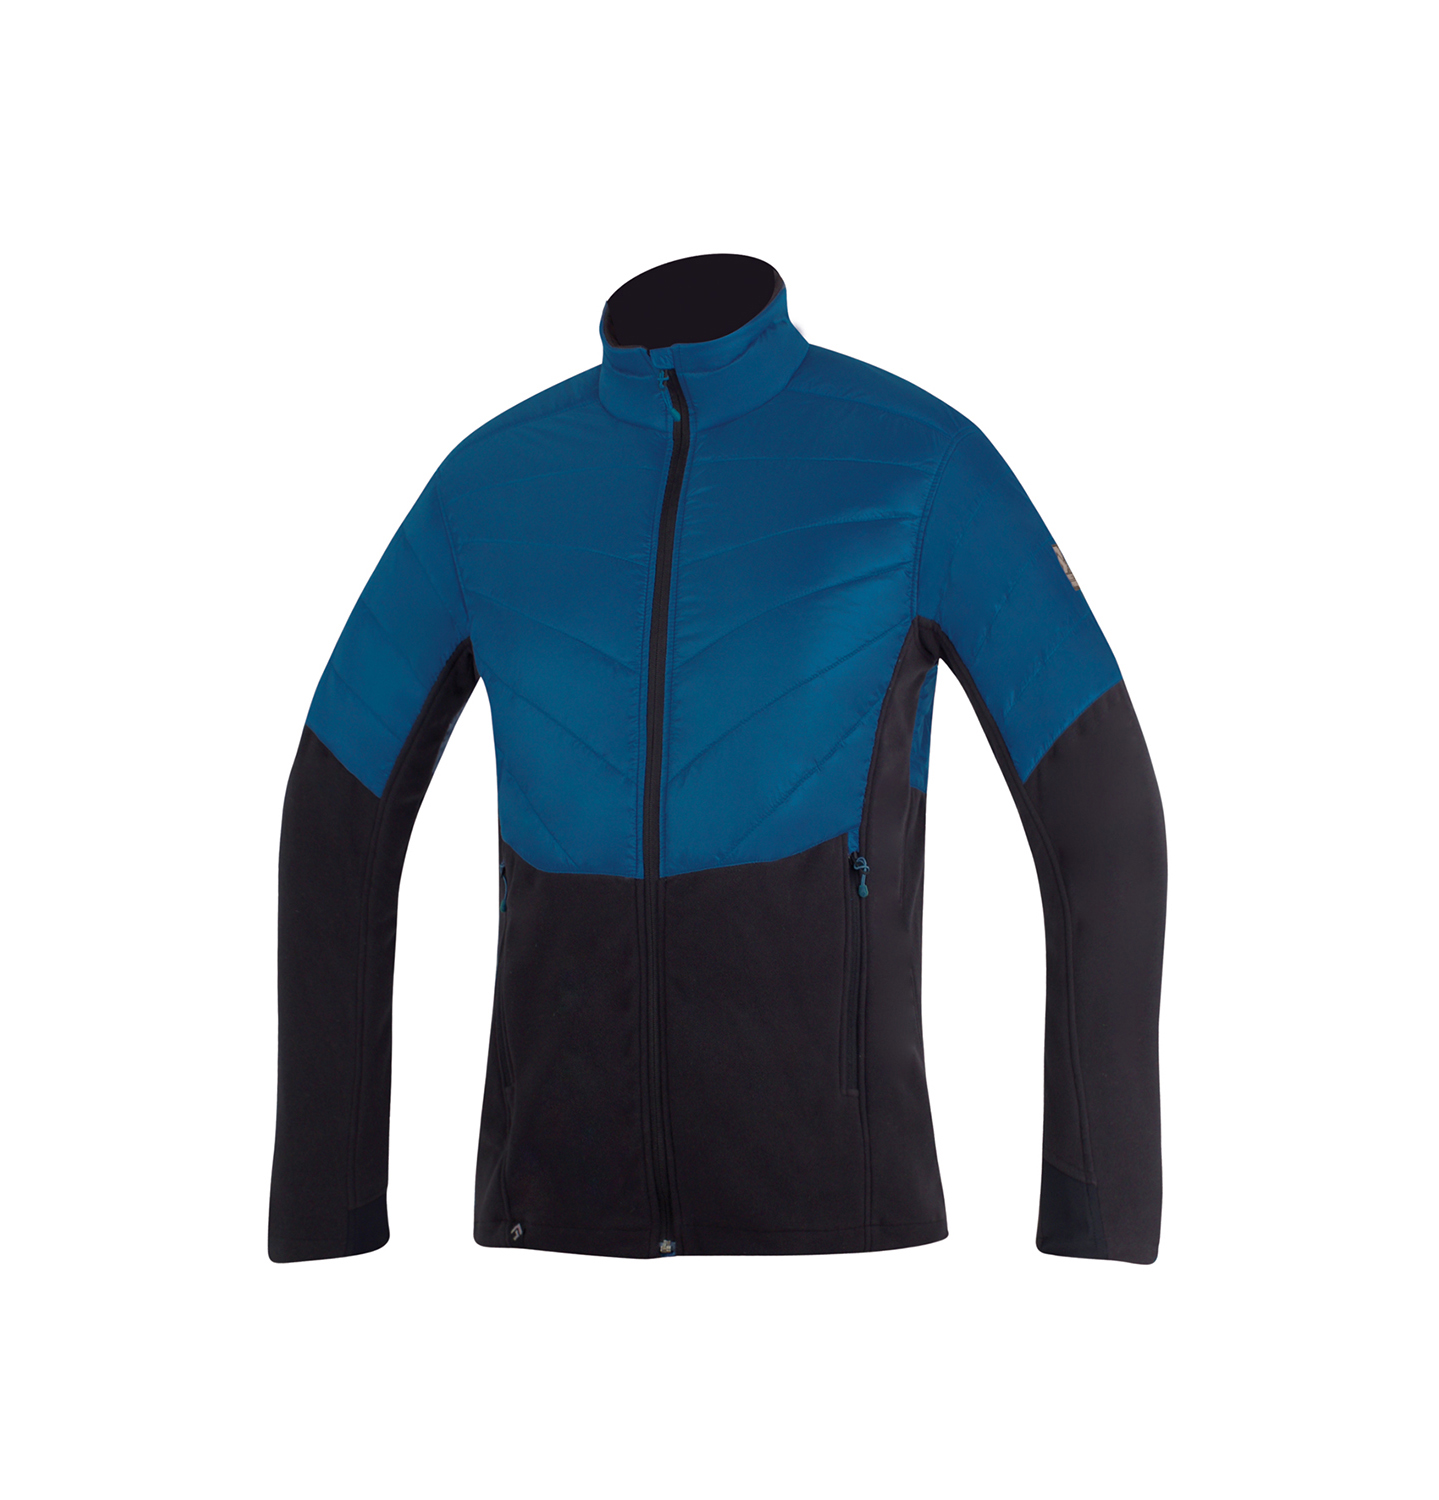 Jacket FUSION, Made in EU - Direct Alpine